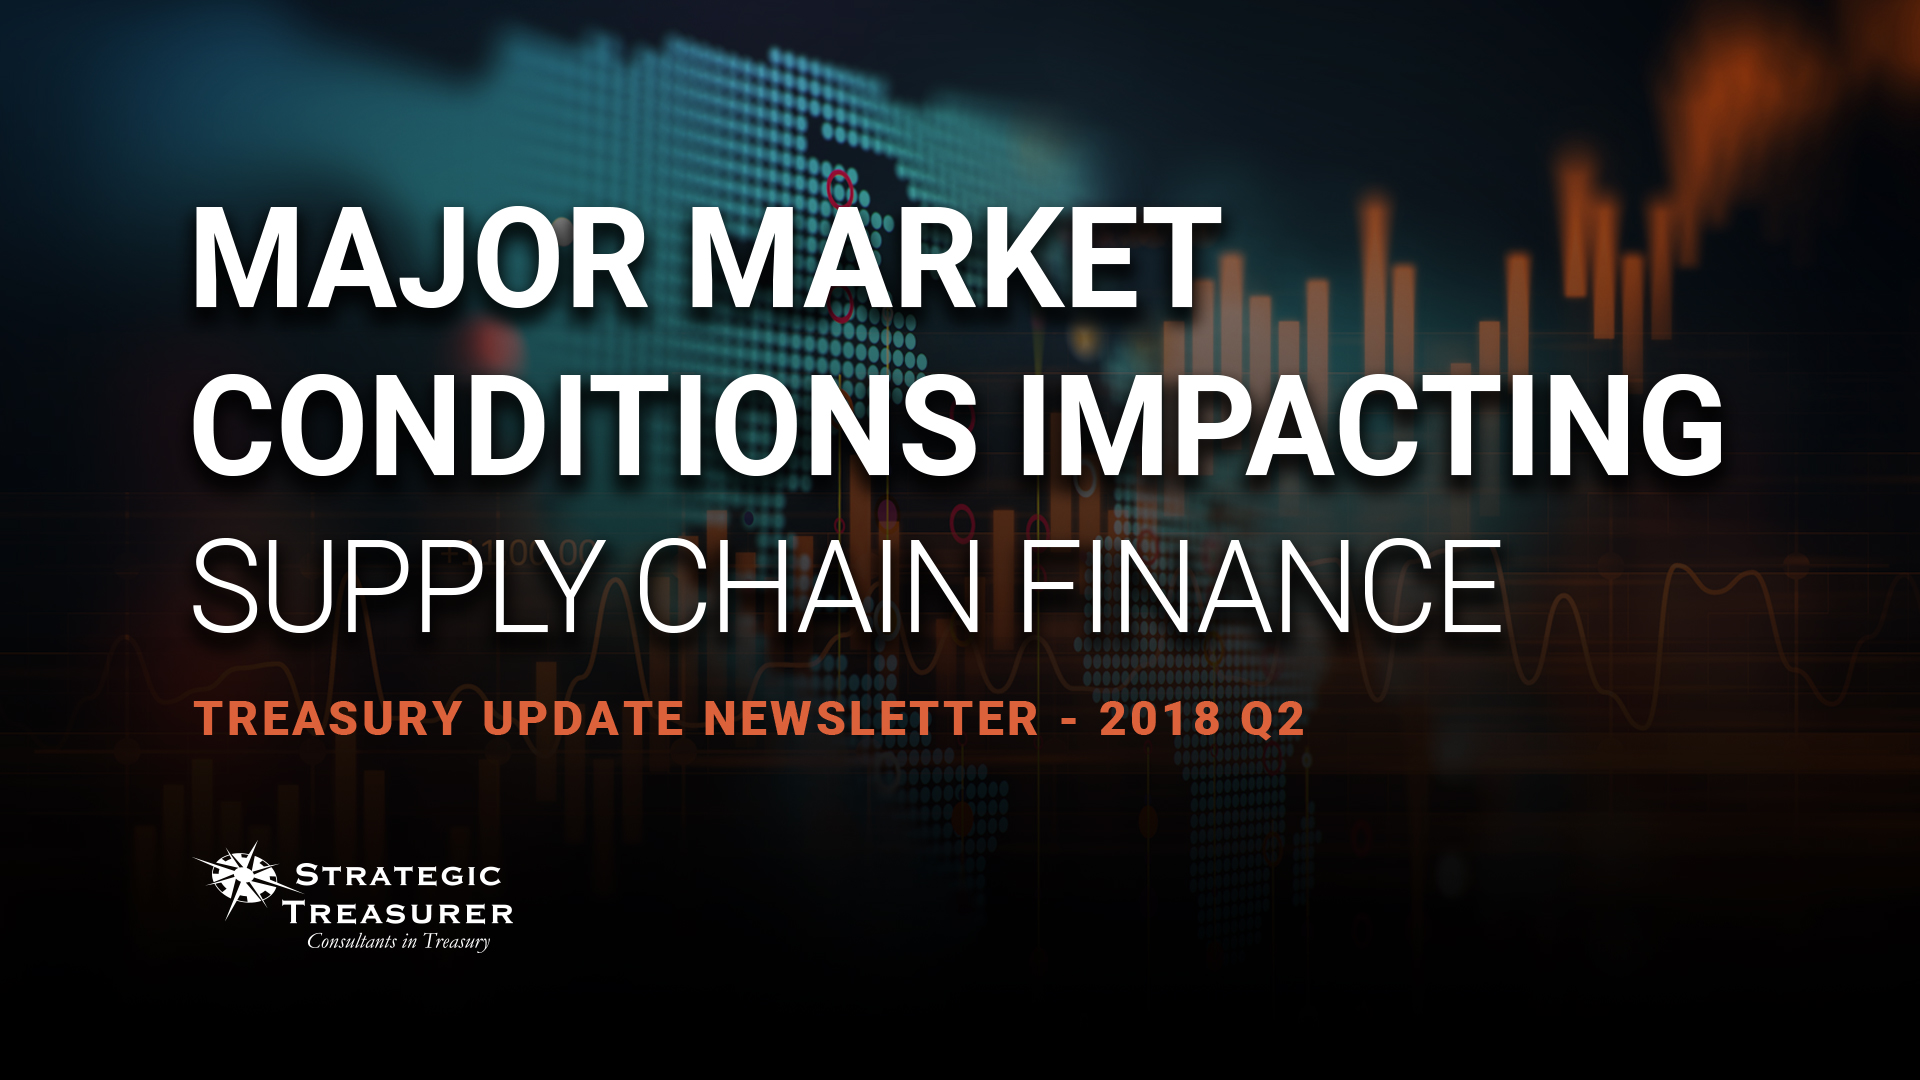 Major Market Conditions Impacting Supply Chain Finance